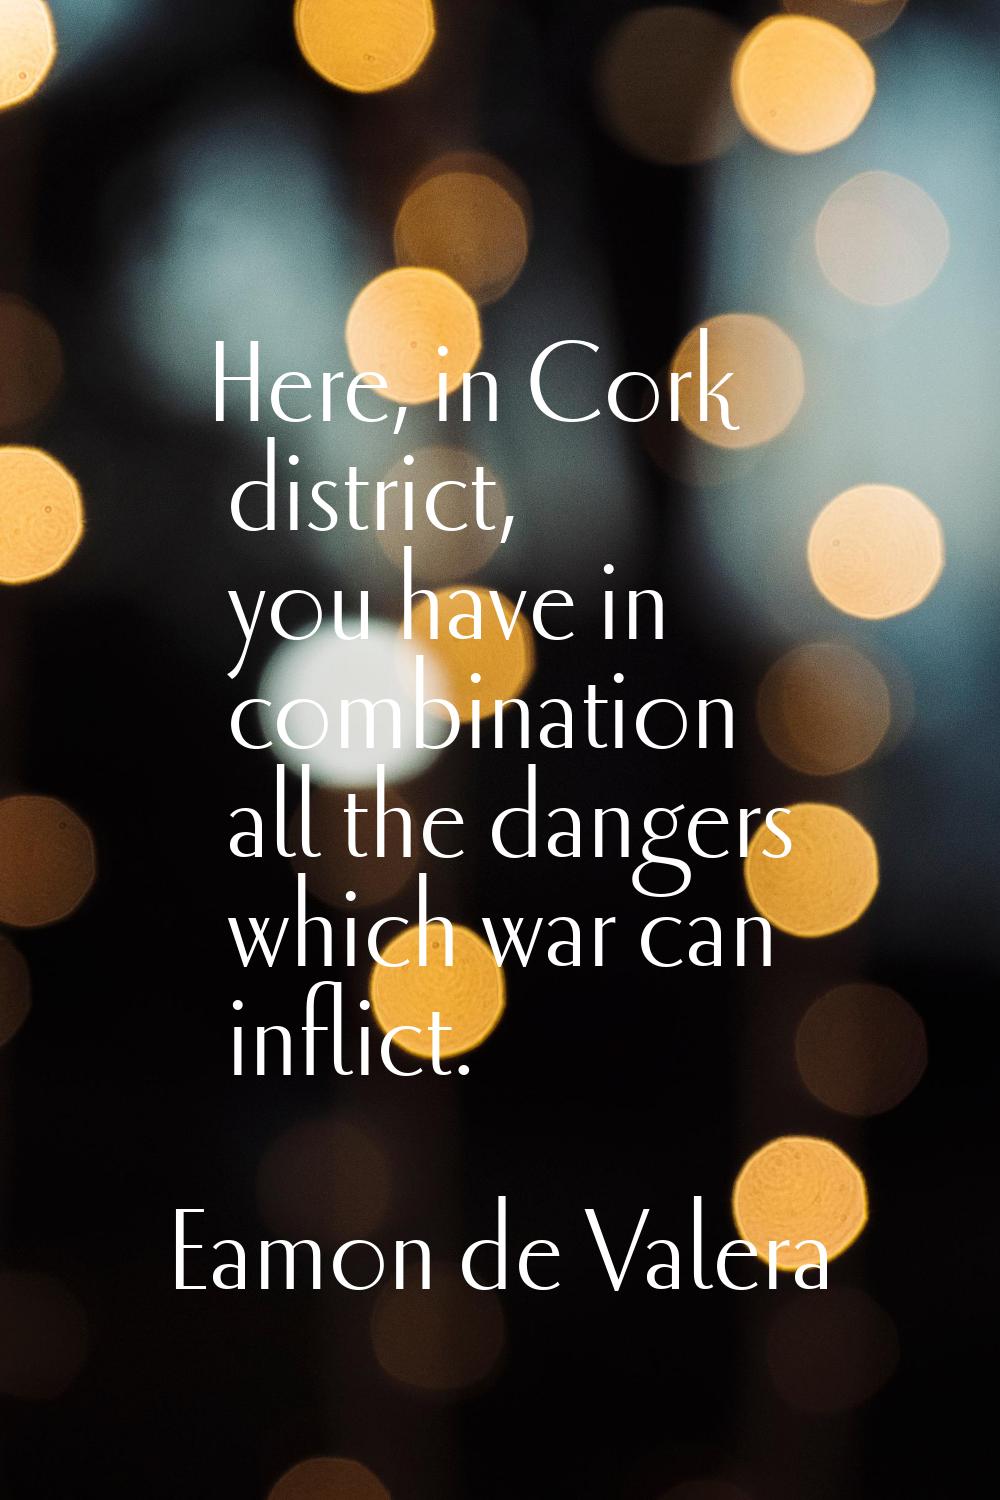 Here, in Cork district, you have in combination all the dangers which war can inflict.